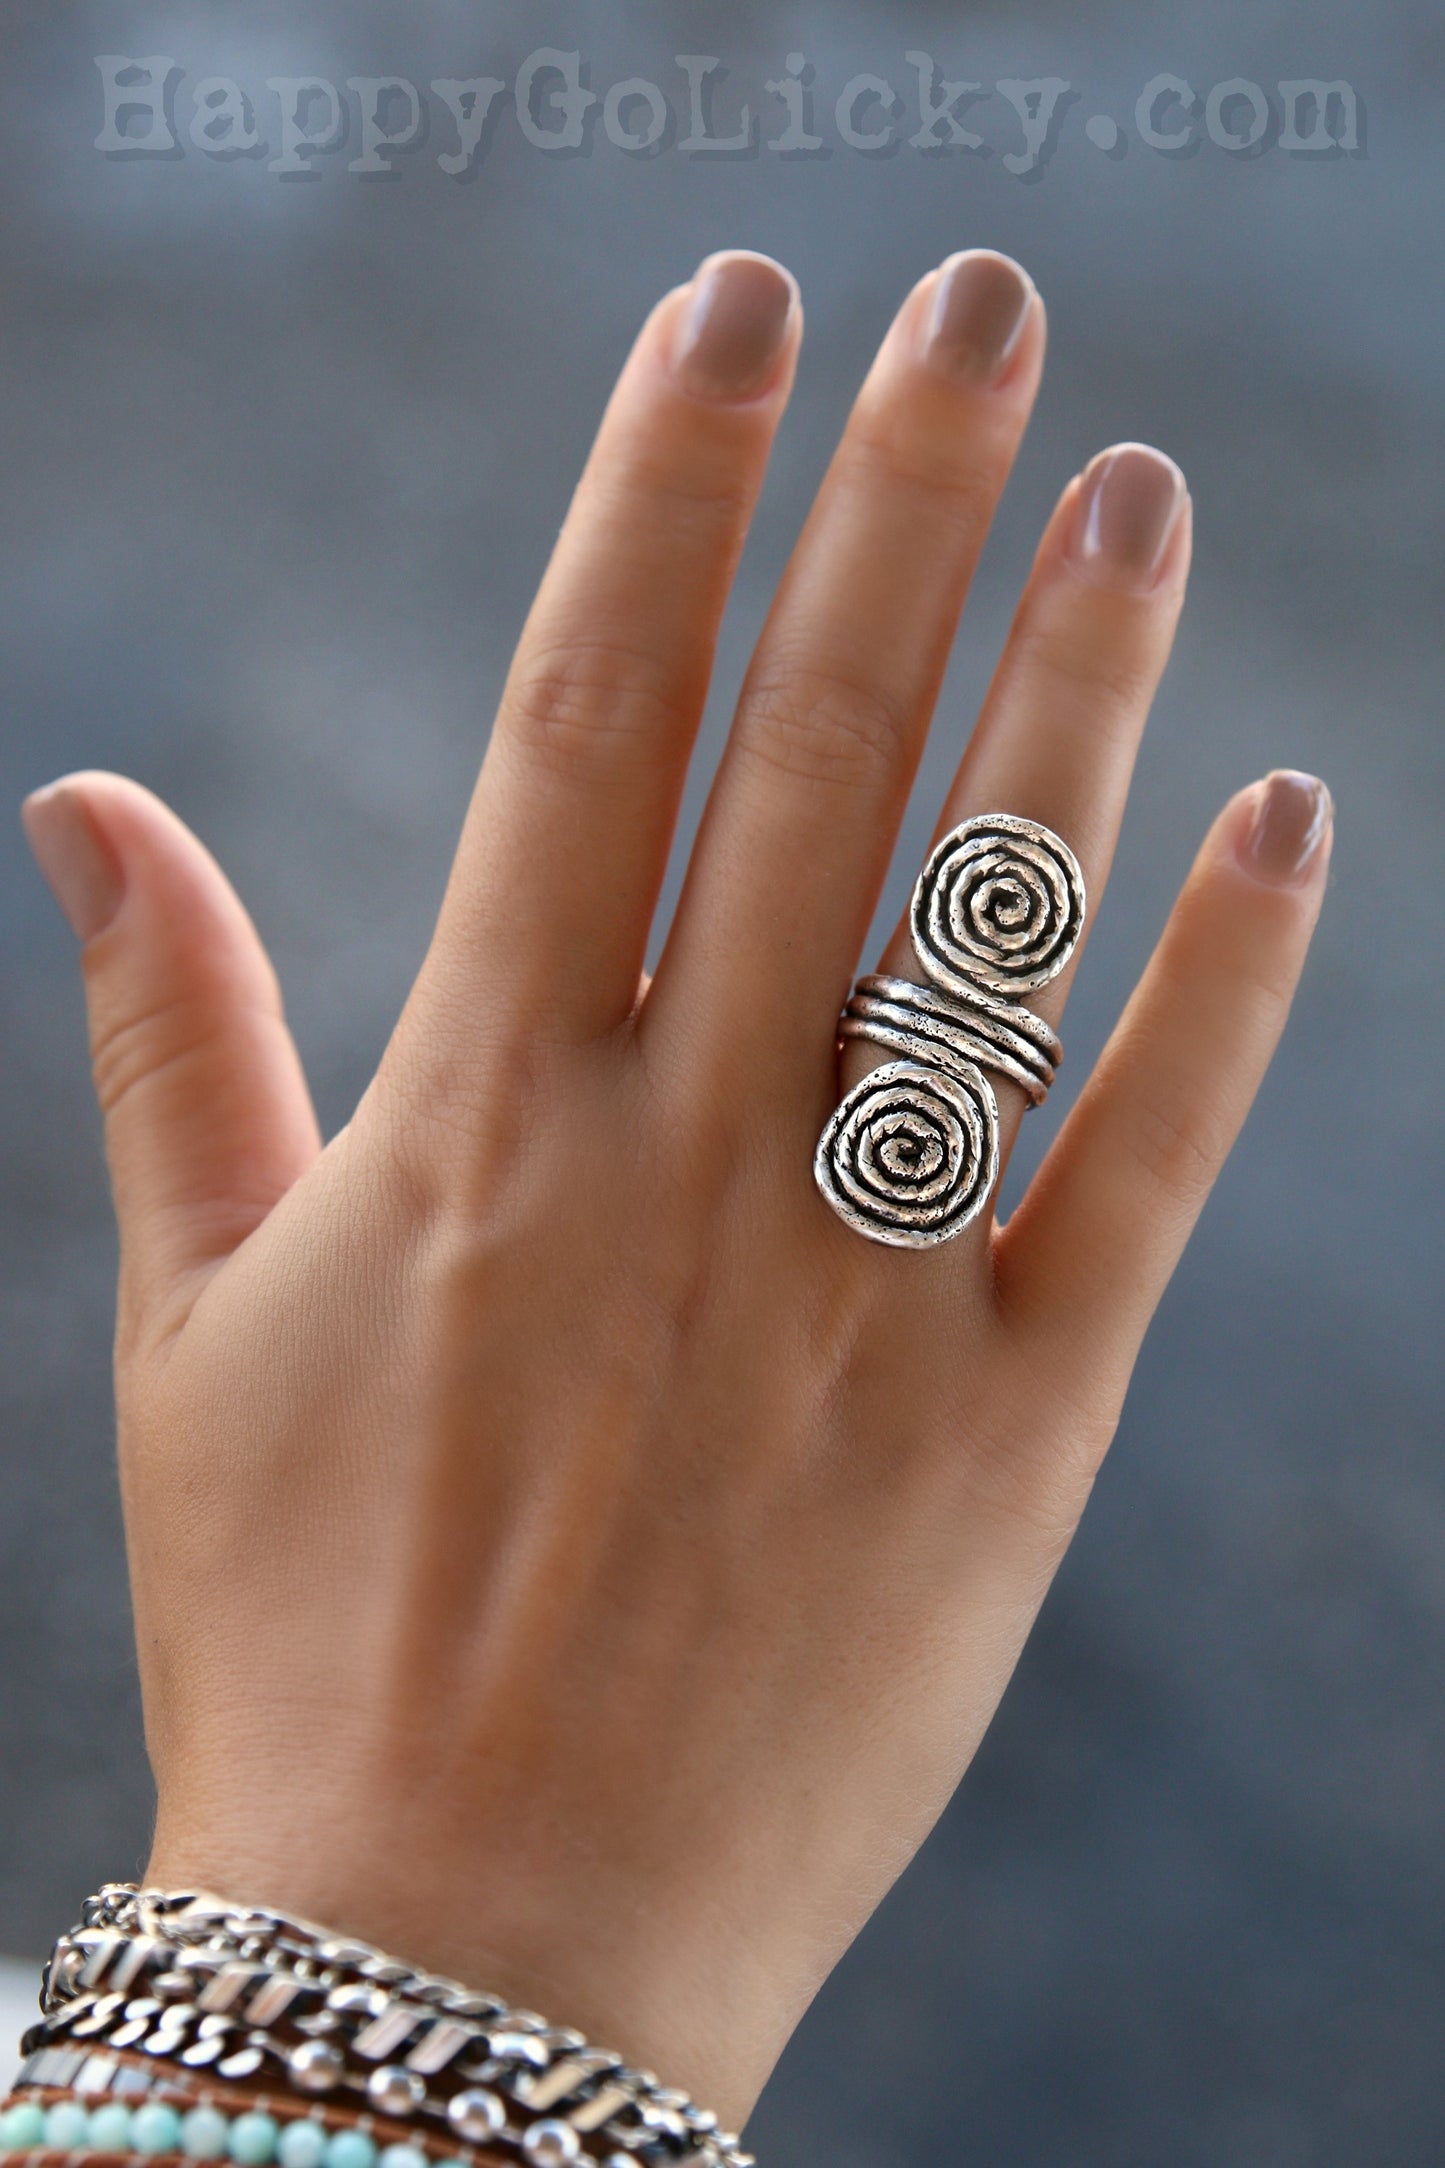 Double Spiral Rope Ring HappyGoLicky Jewelry Sterling Silver Ring